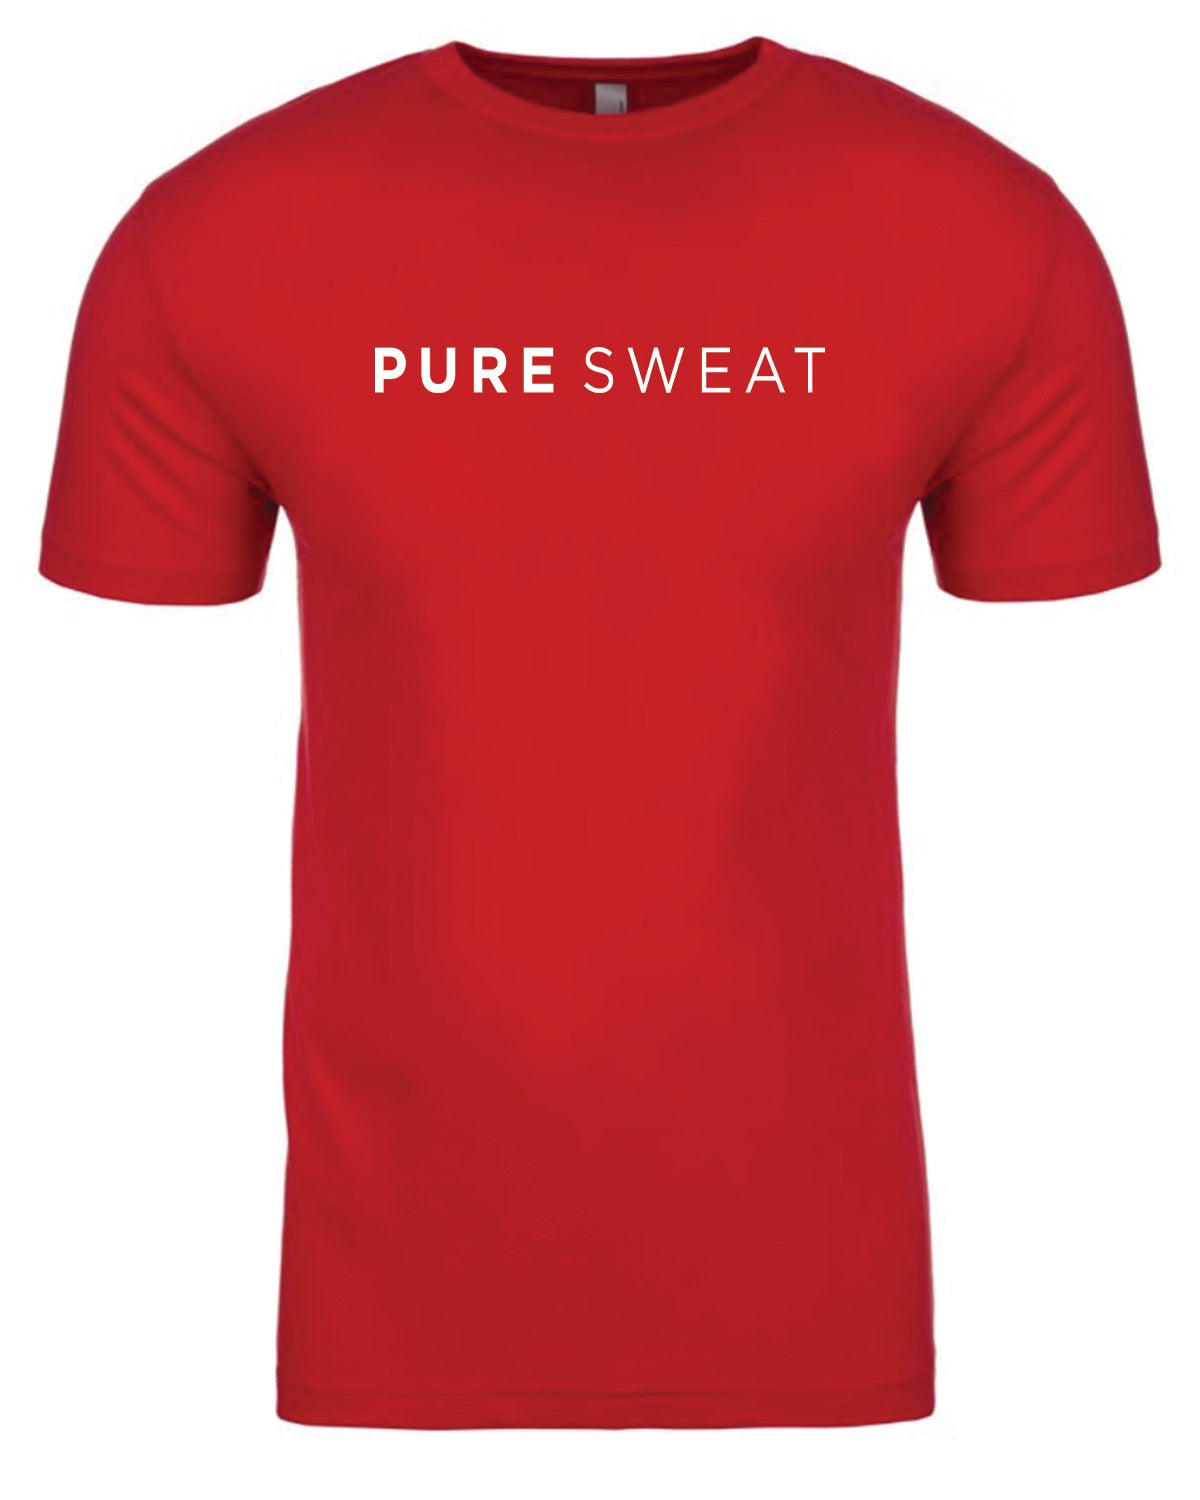 The Classic Pure Sweat Title T-Shirt